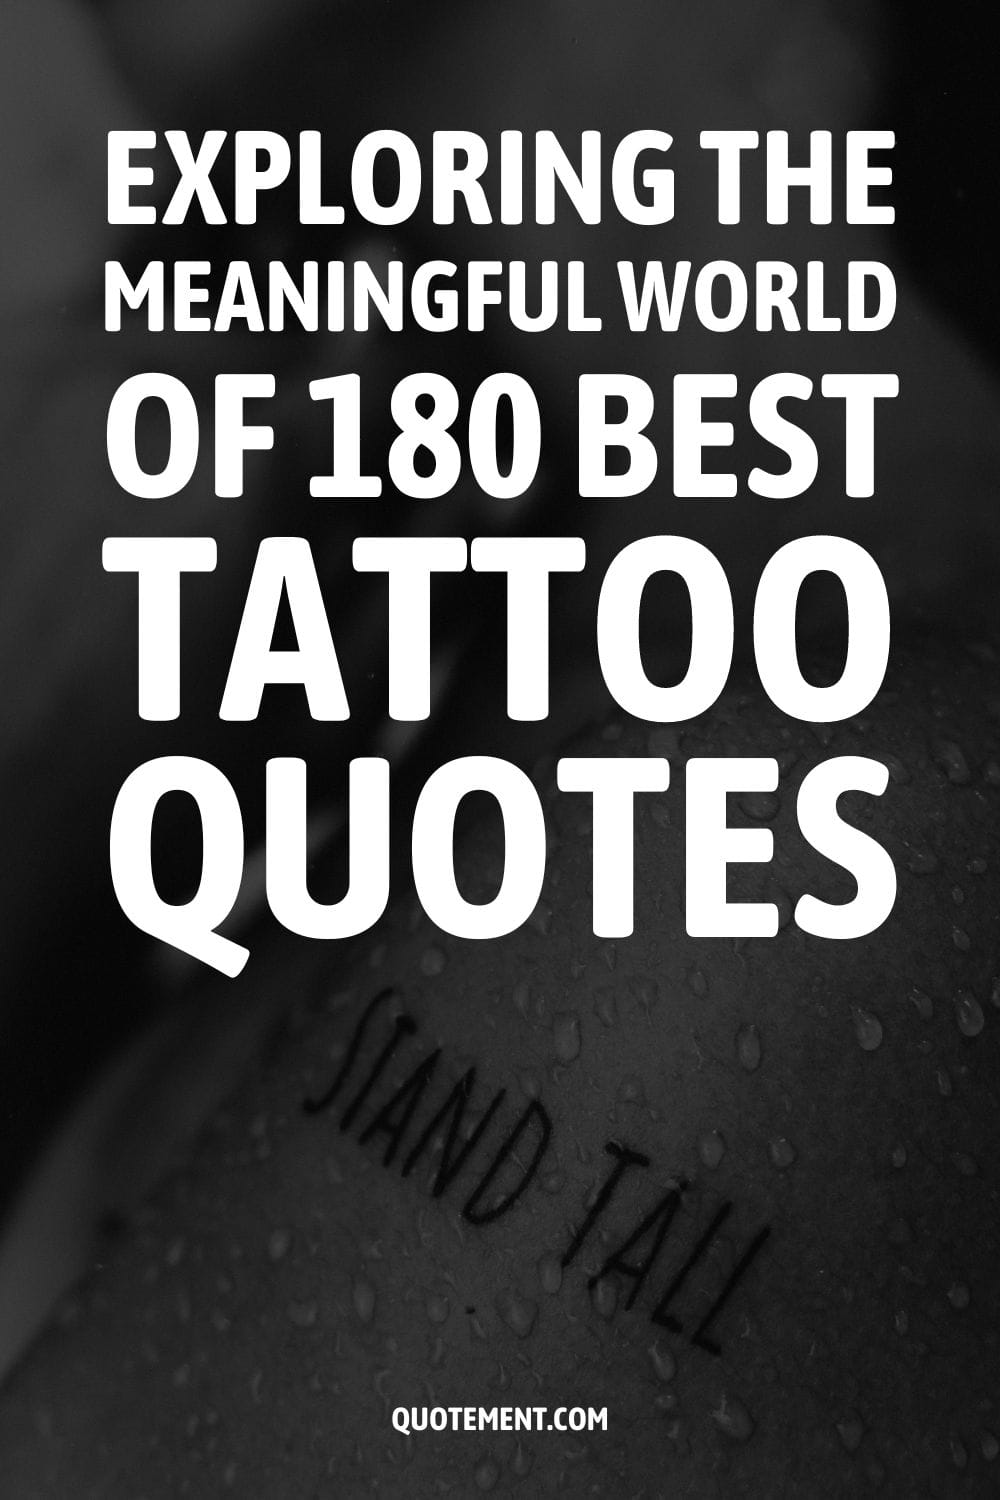 Exploring The Meaningful World Of 180 Best Tattoo Quotes
